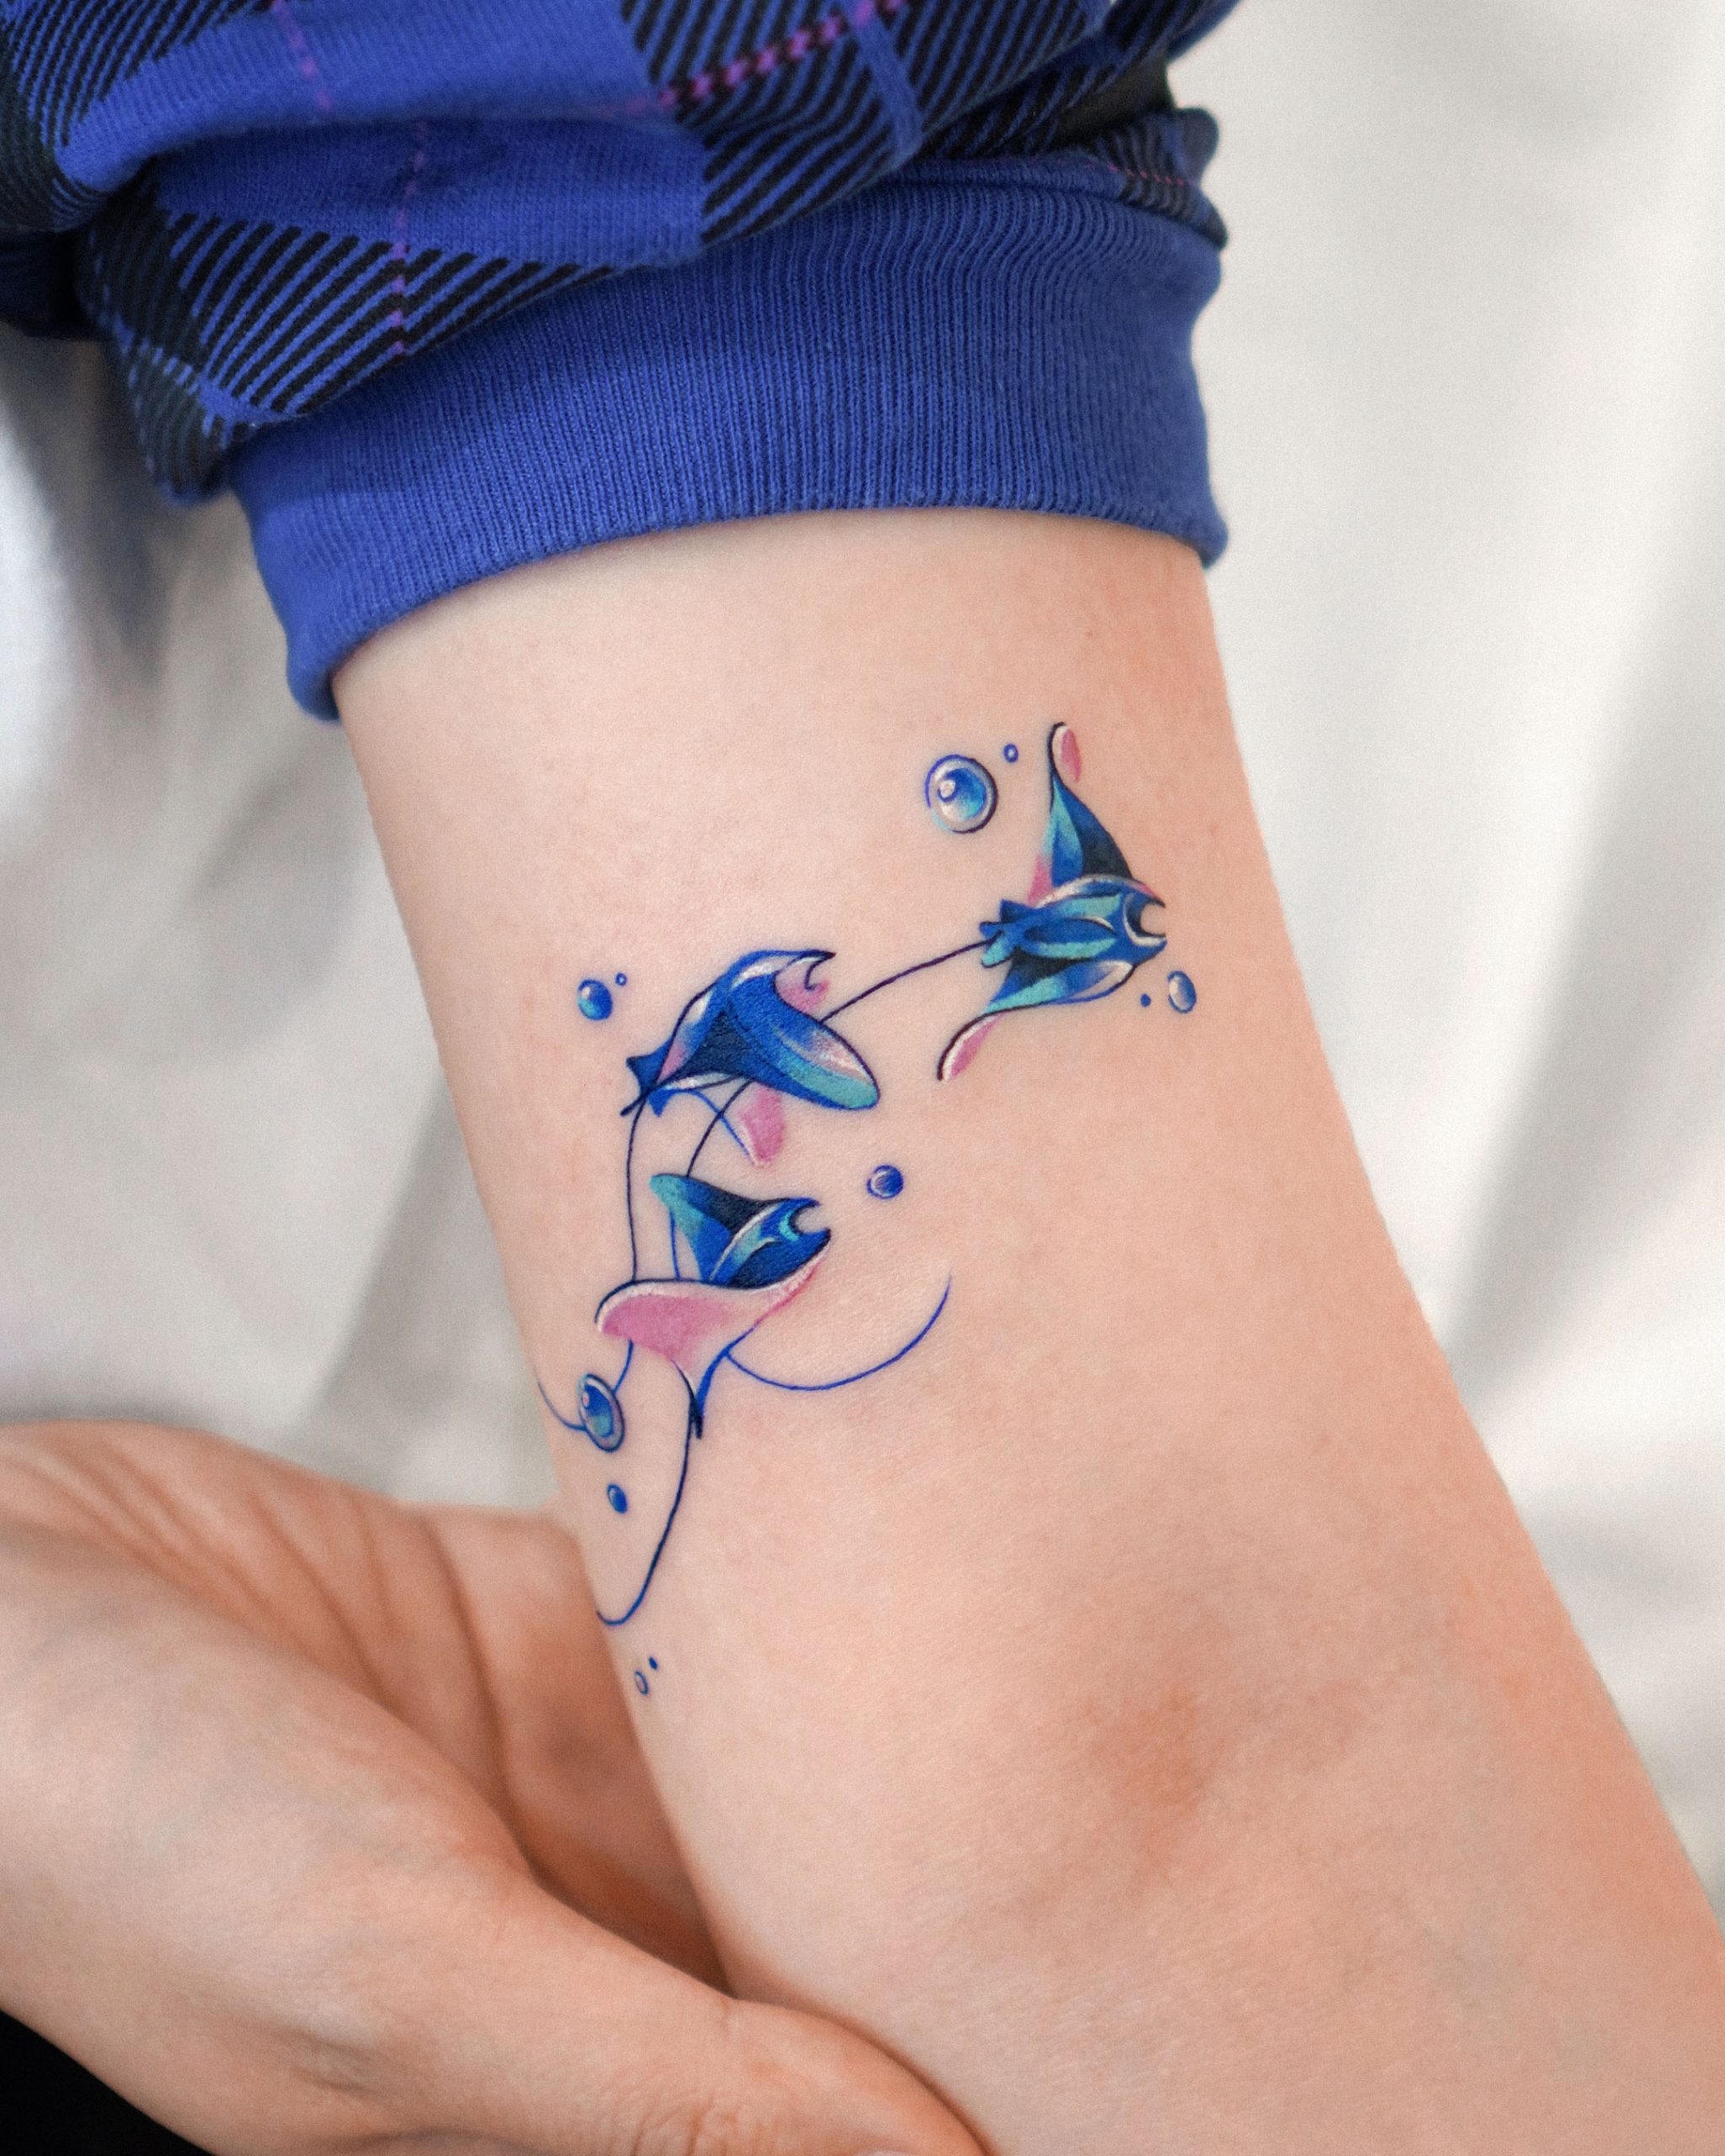 I Got An Ephemeral Tattoo: See Photos of Made to Fade Ink | POPSUGAR Beauty